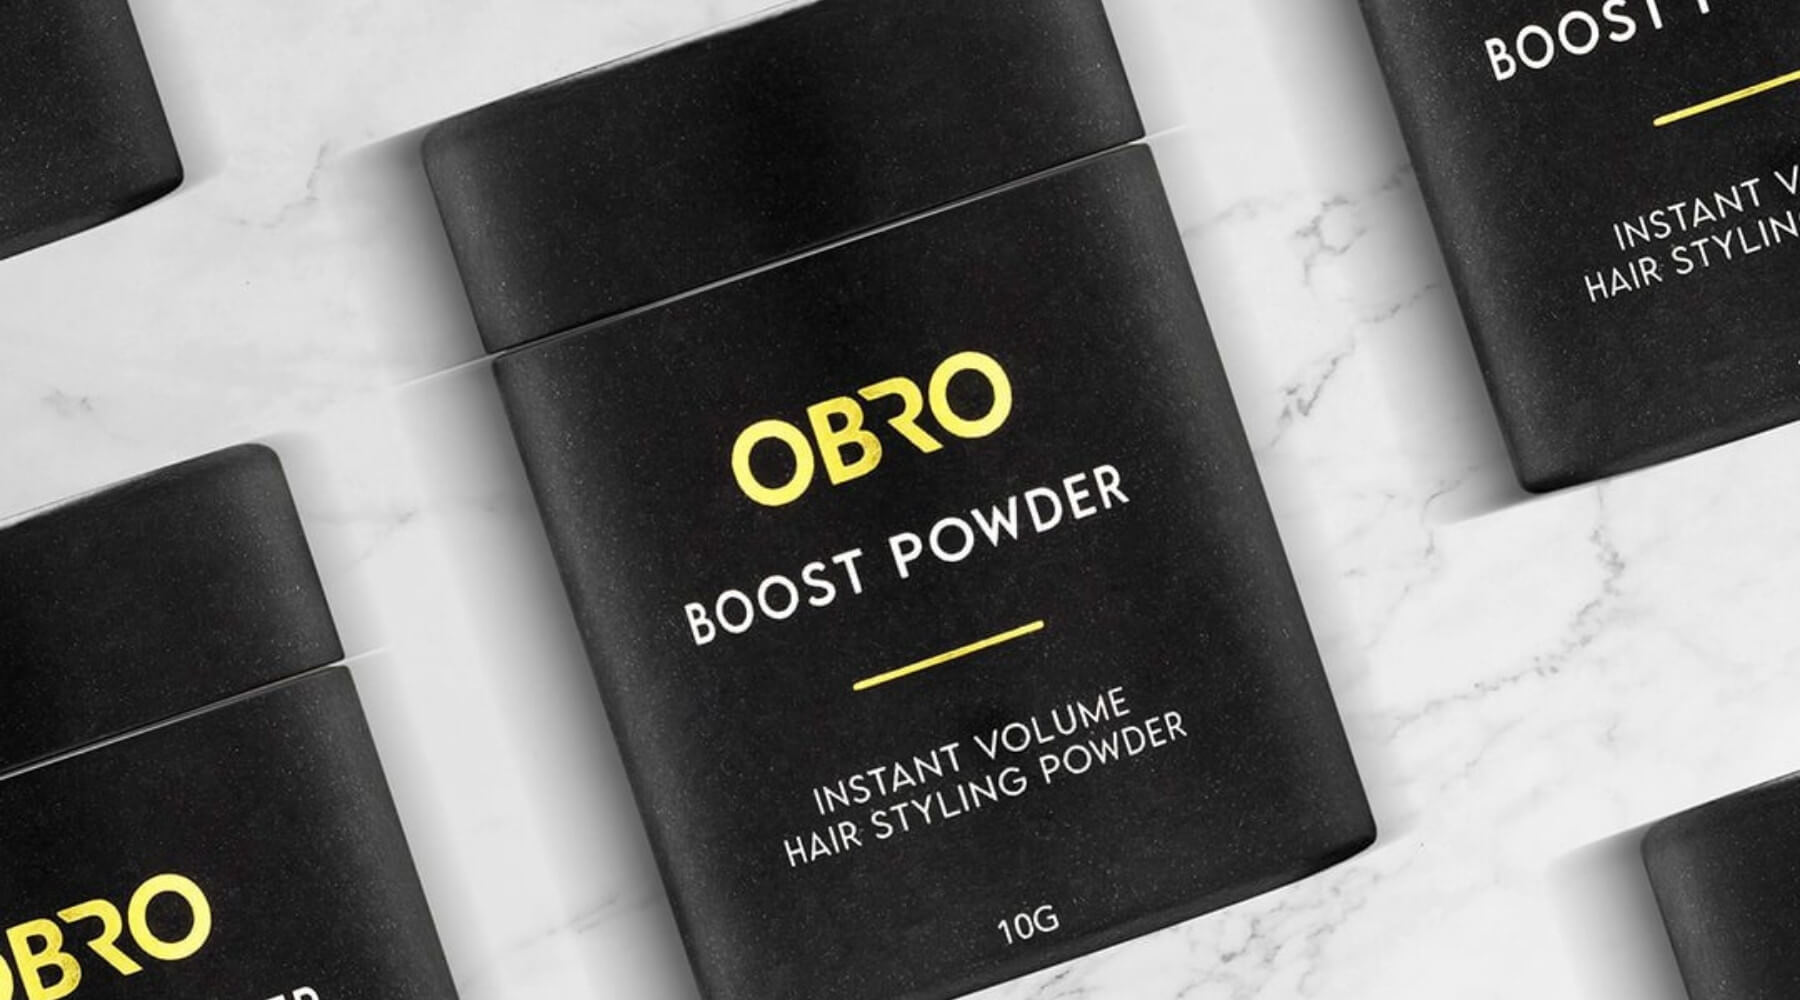 Is Hair Styling Powder Bad for Your Hair?